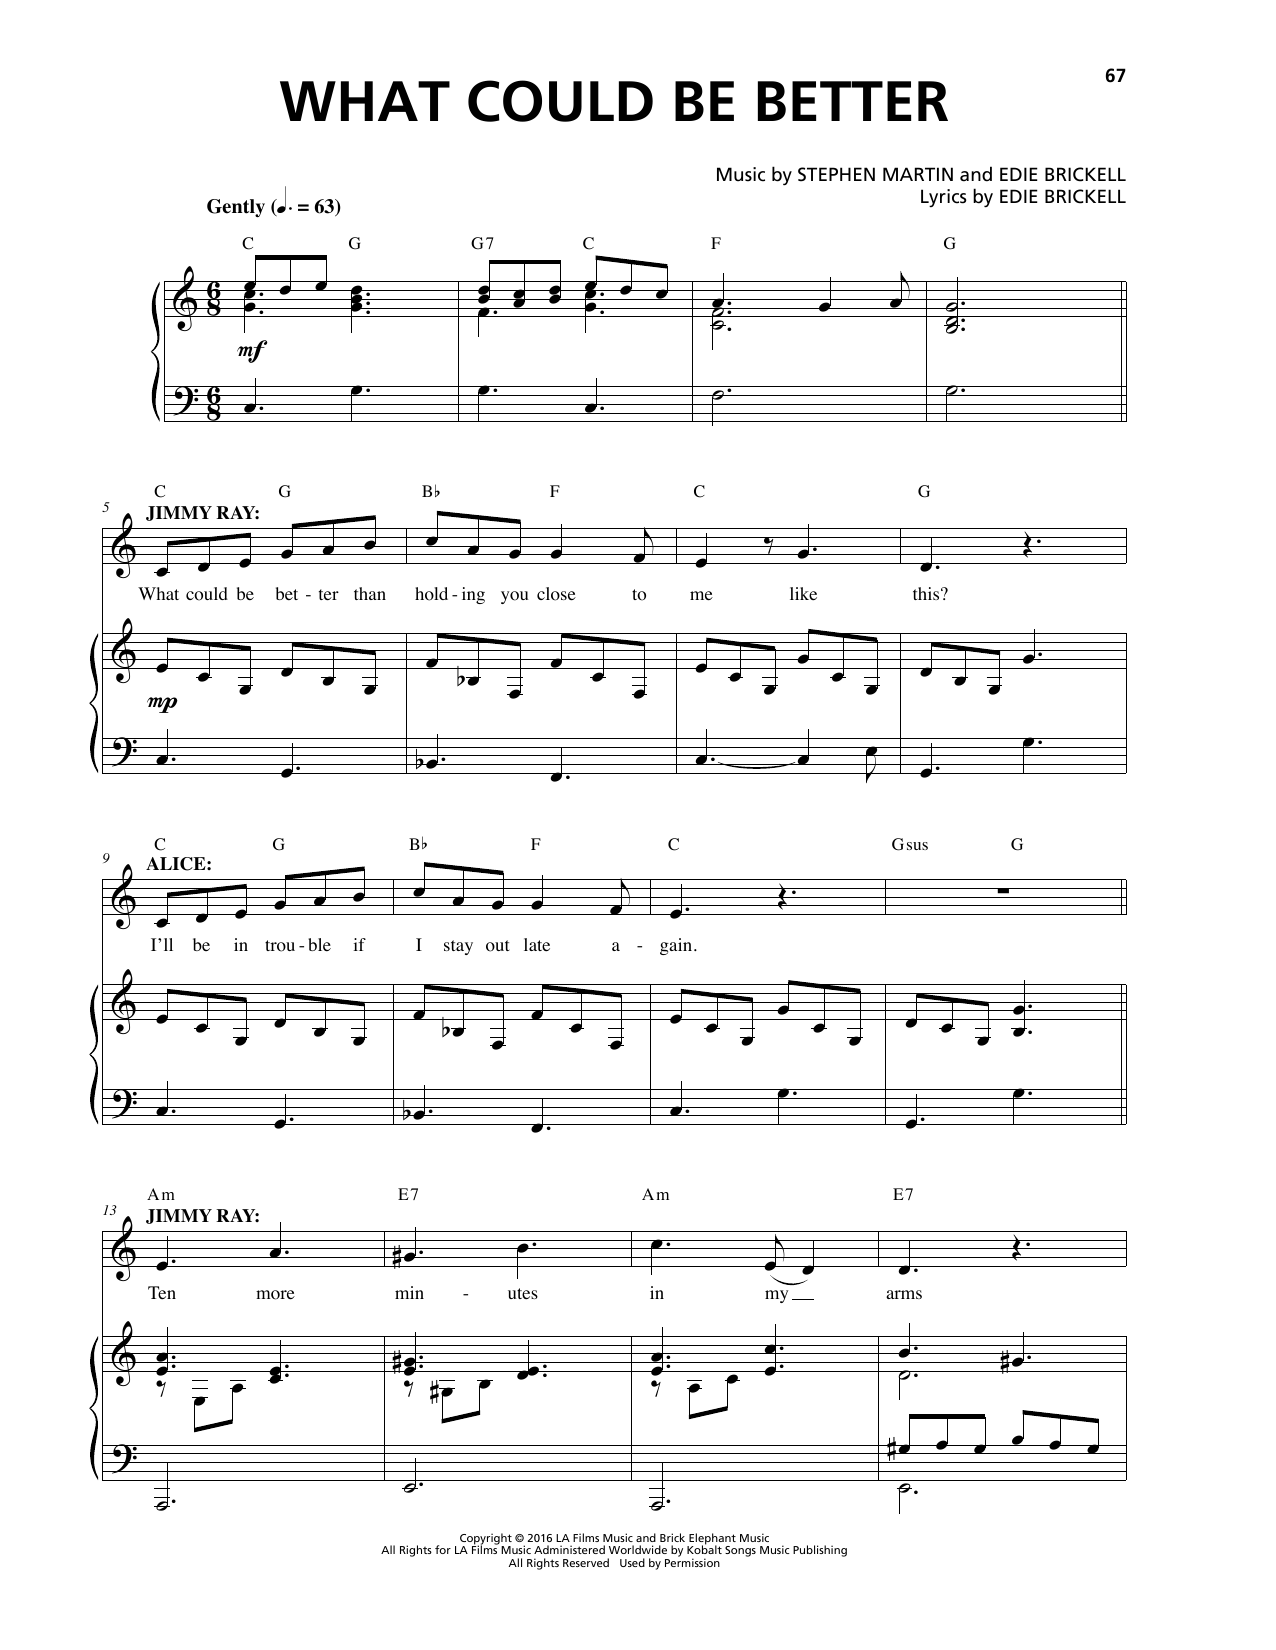 Download Stephen Martin & Edie Brickell What Could Be Better Sheet Music